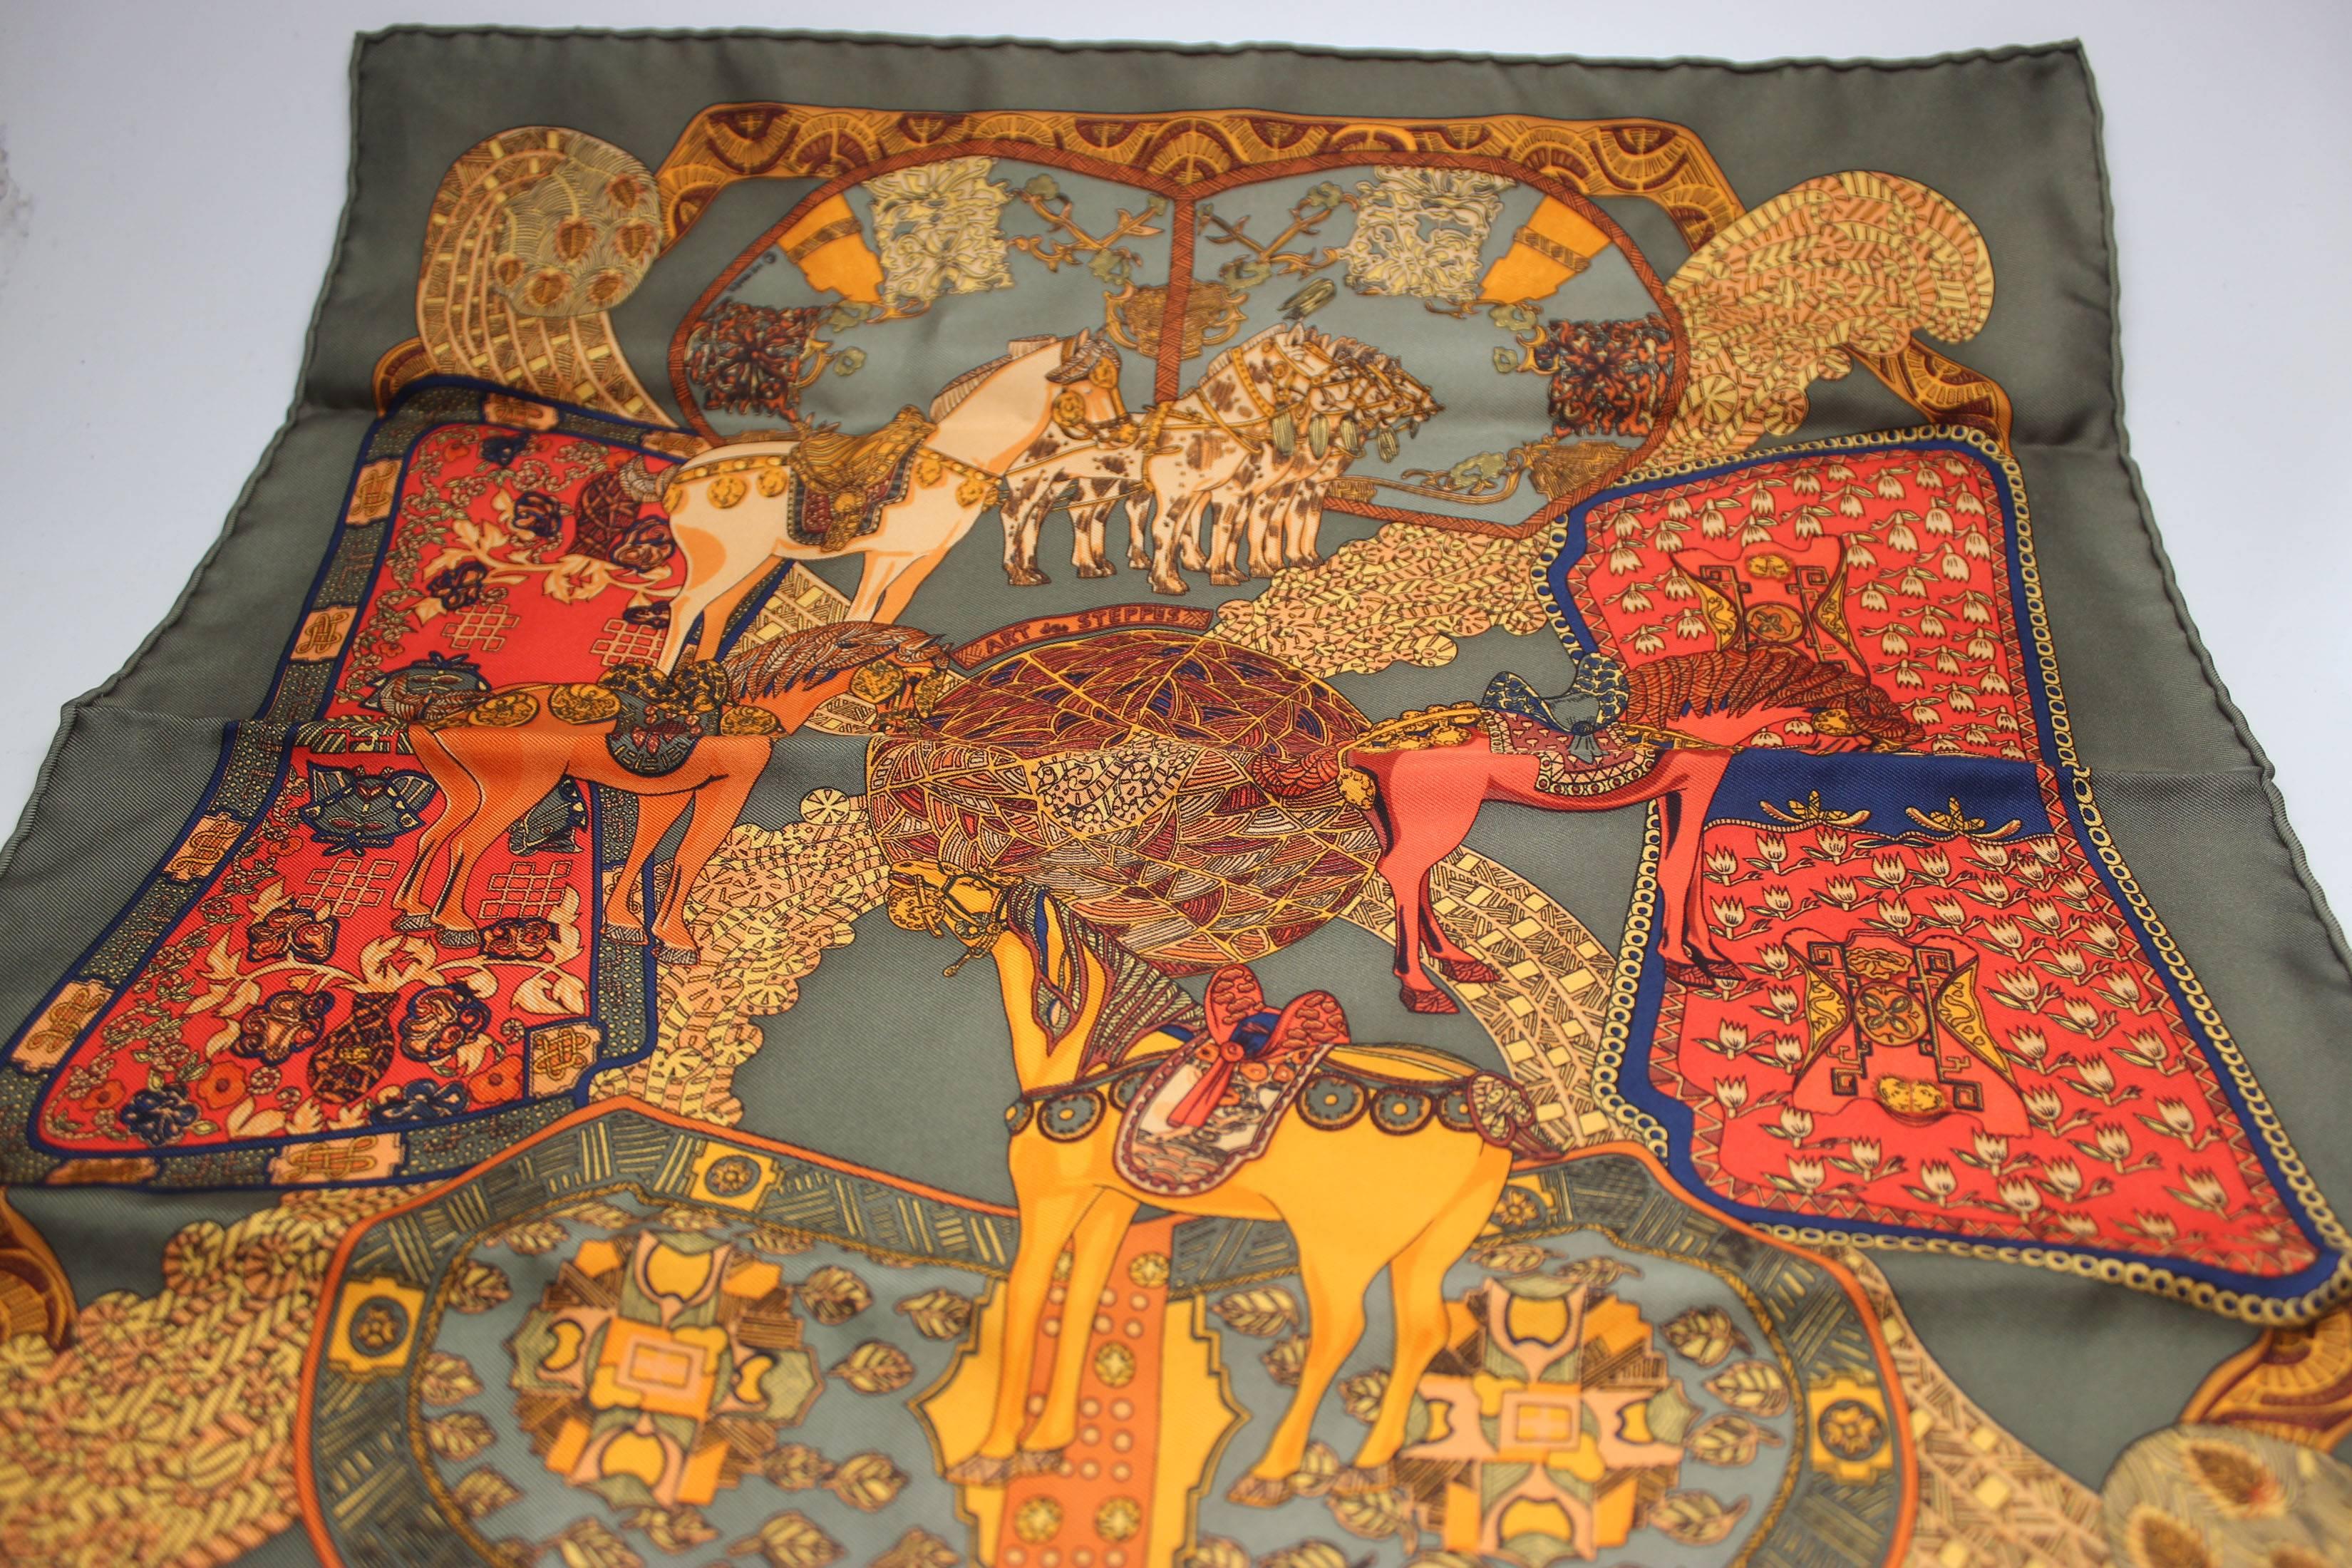 This perfect silk Hermes scarf is a 16 inch square. The design from 1991 is by the artist Annie Faivre and is titled 